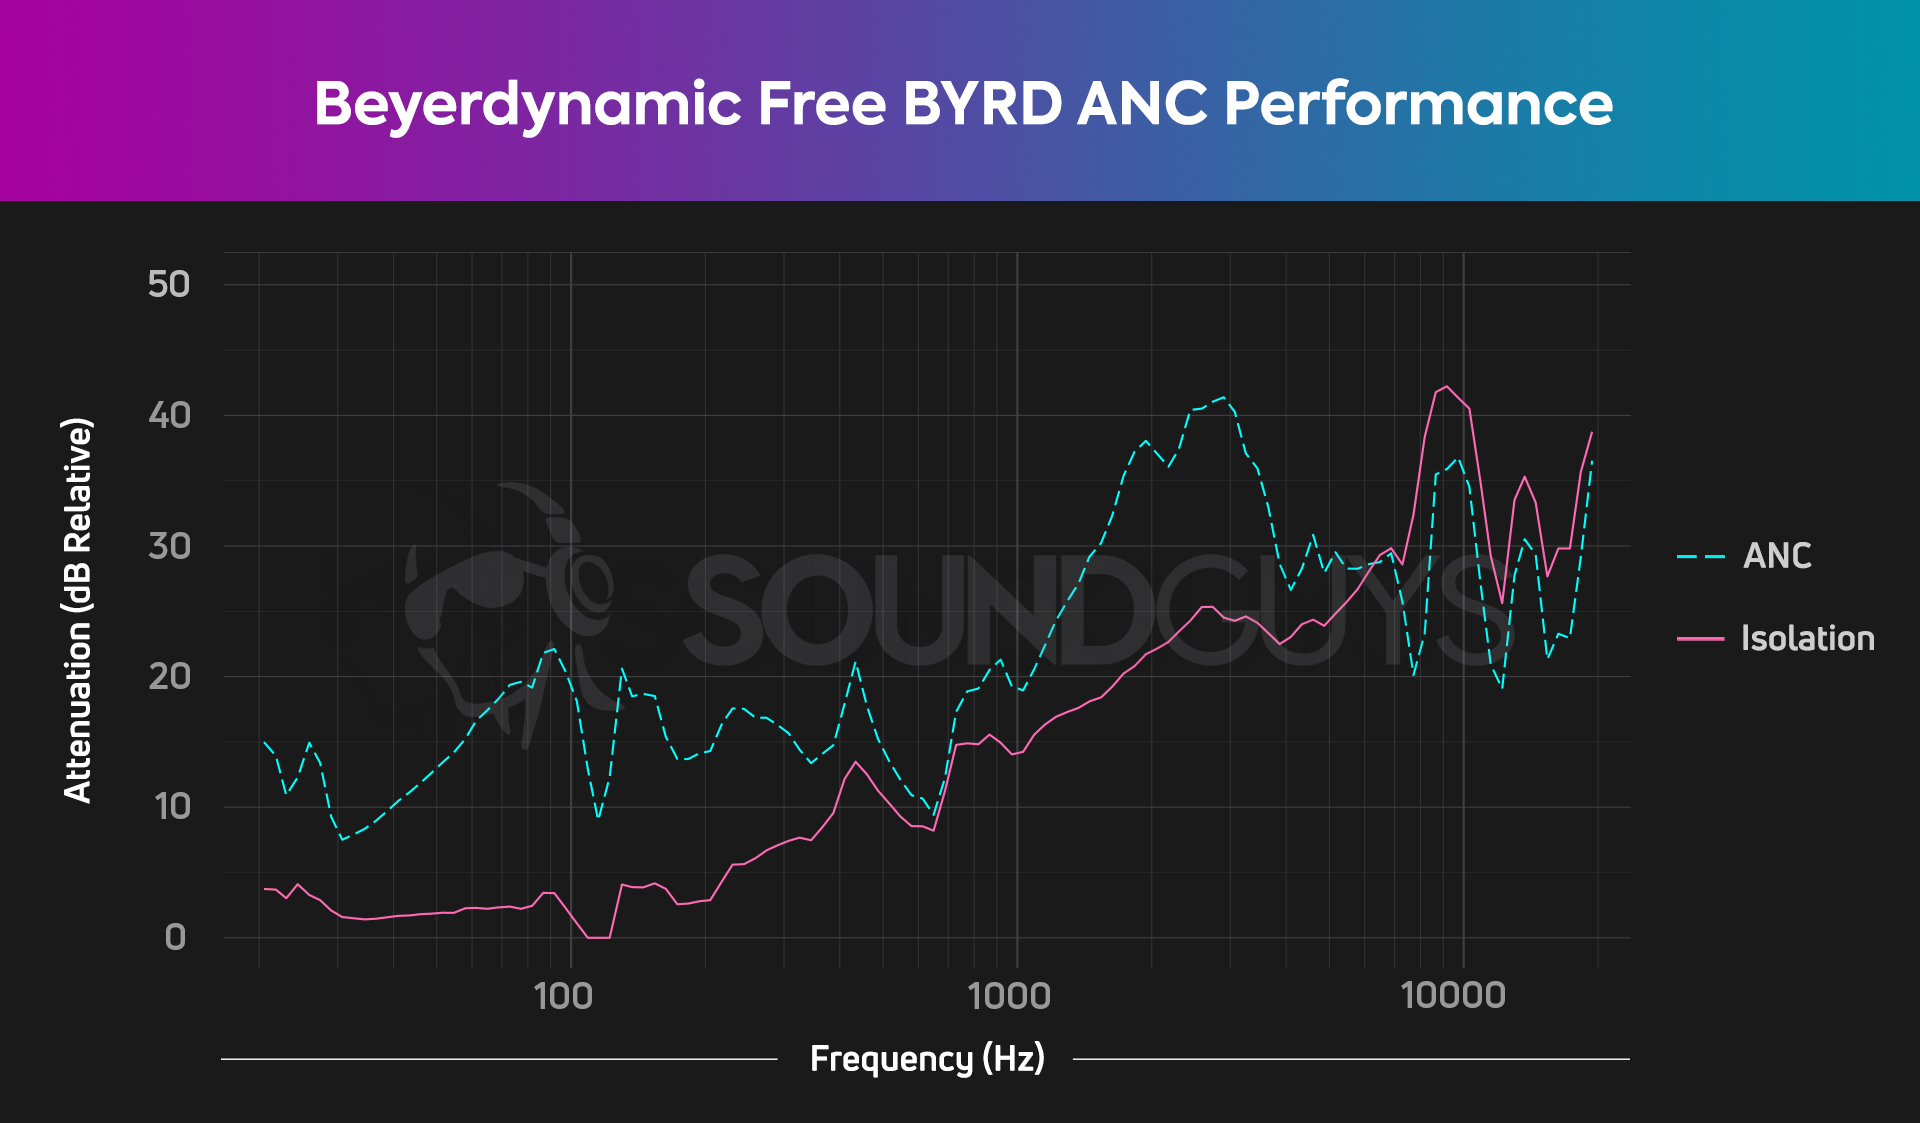 A chart showing the ANC attenuation of the Beyerdynamic Free BYRD.